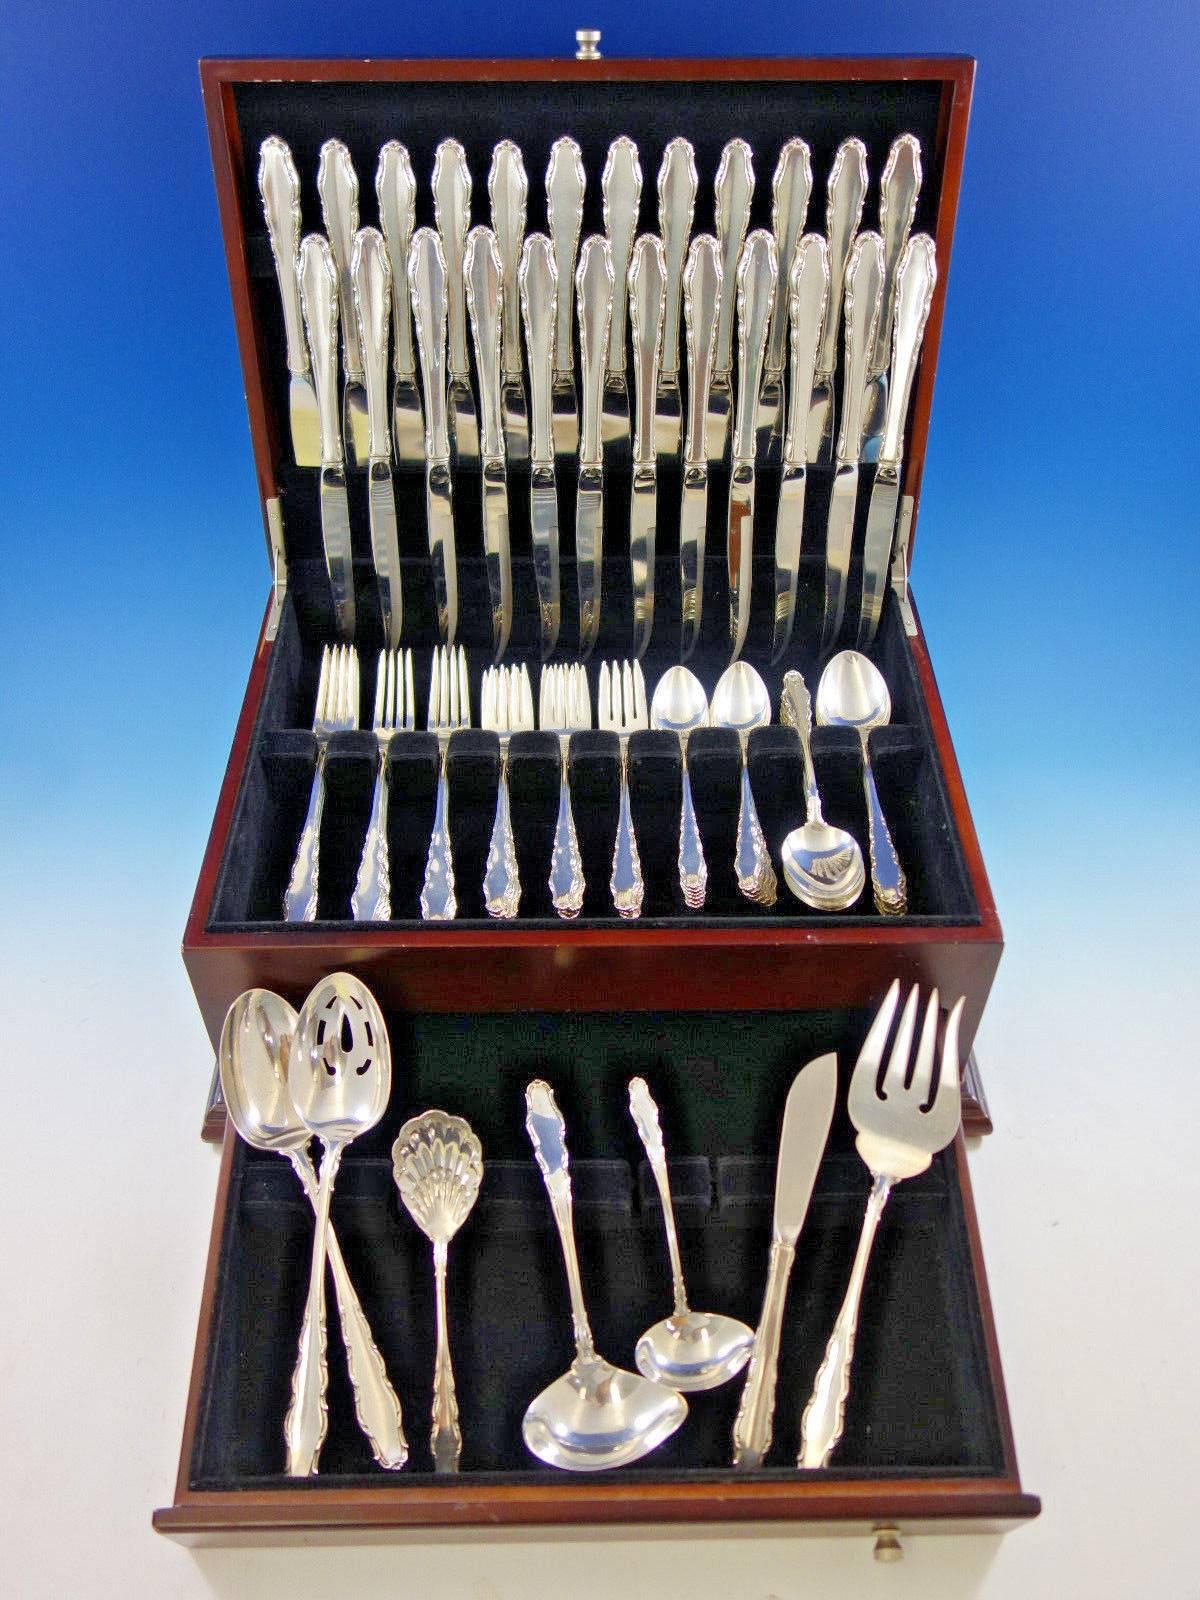 English Provincial by Reed and Barton sterling silver flatware set of 79 pieces. This set includes: 

12 knives, 9 1/8